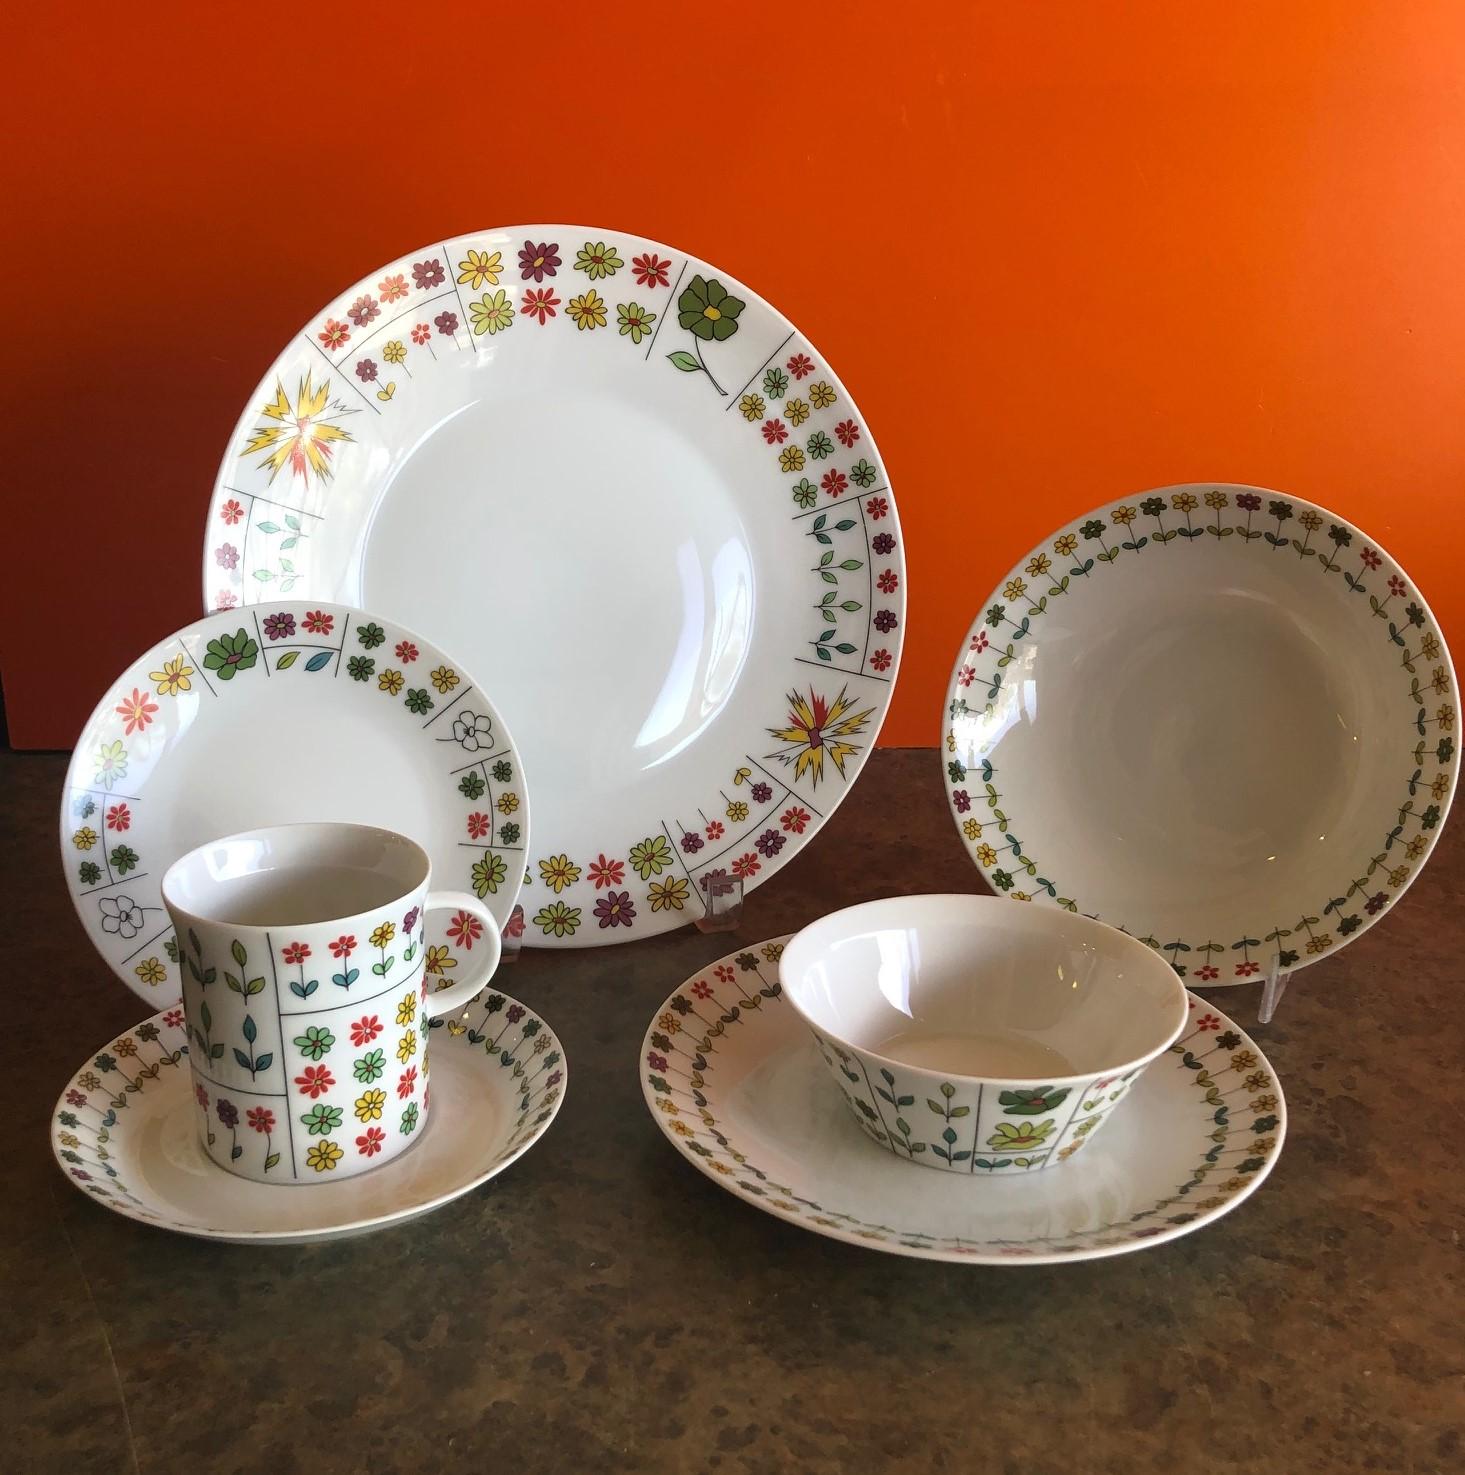 Collection of Piemonte Dinnerware by Emilio Pucci for Rosenthal Studio Line 1